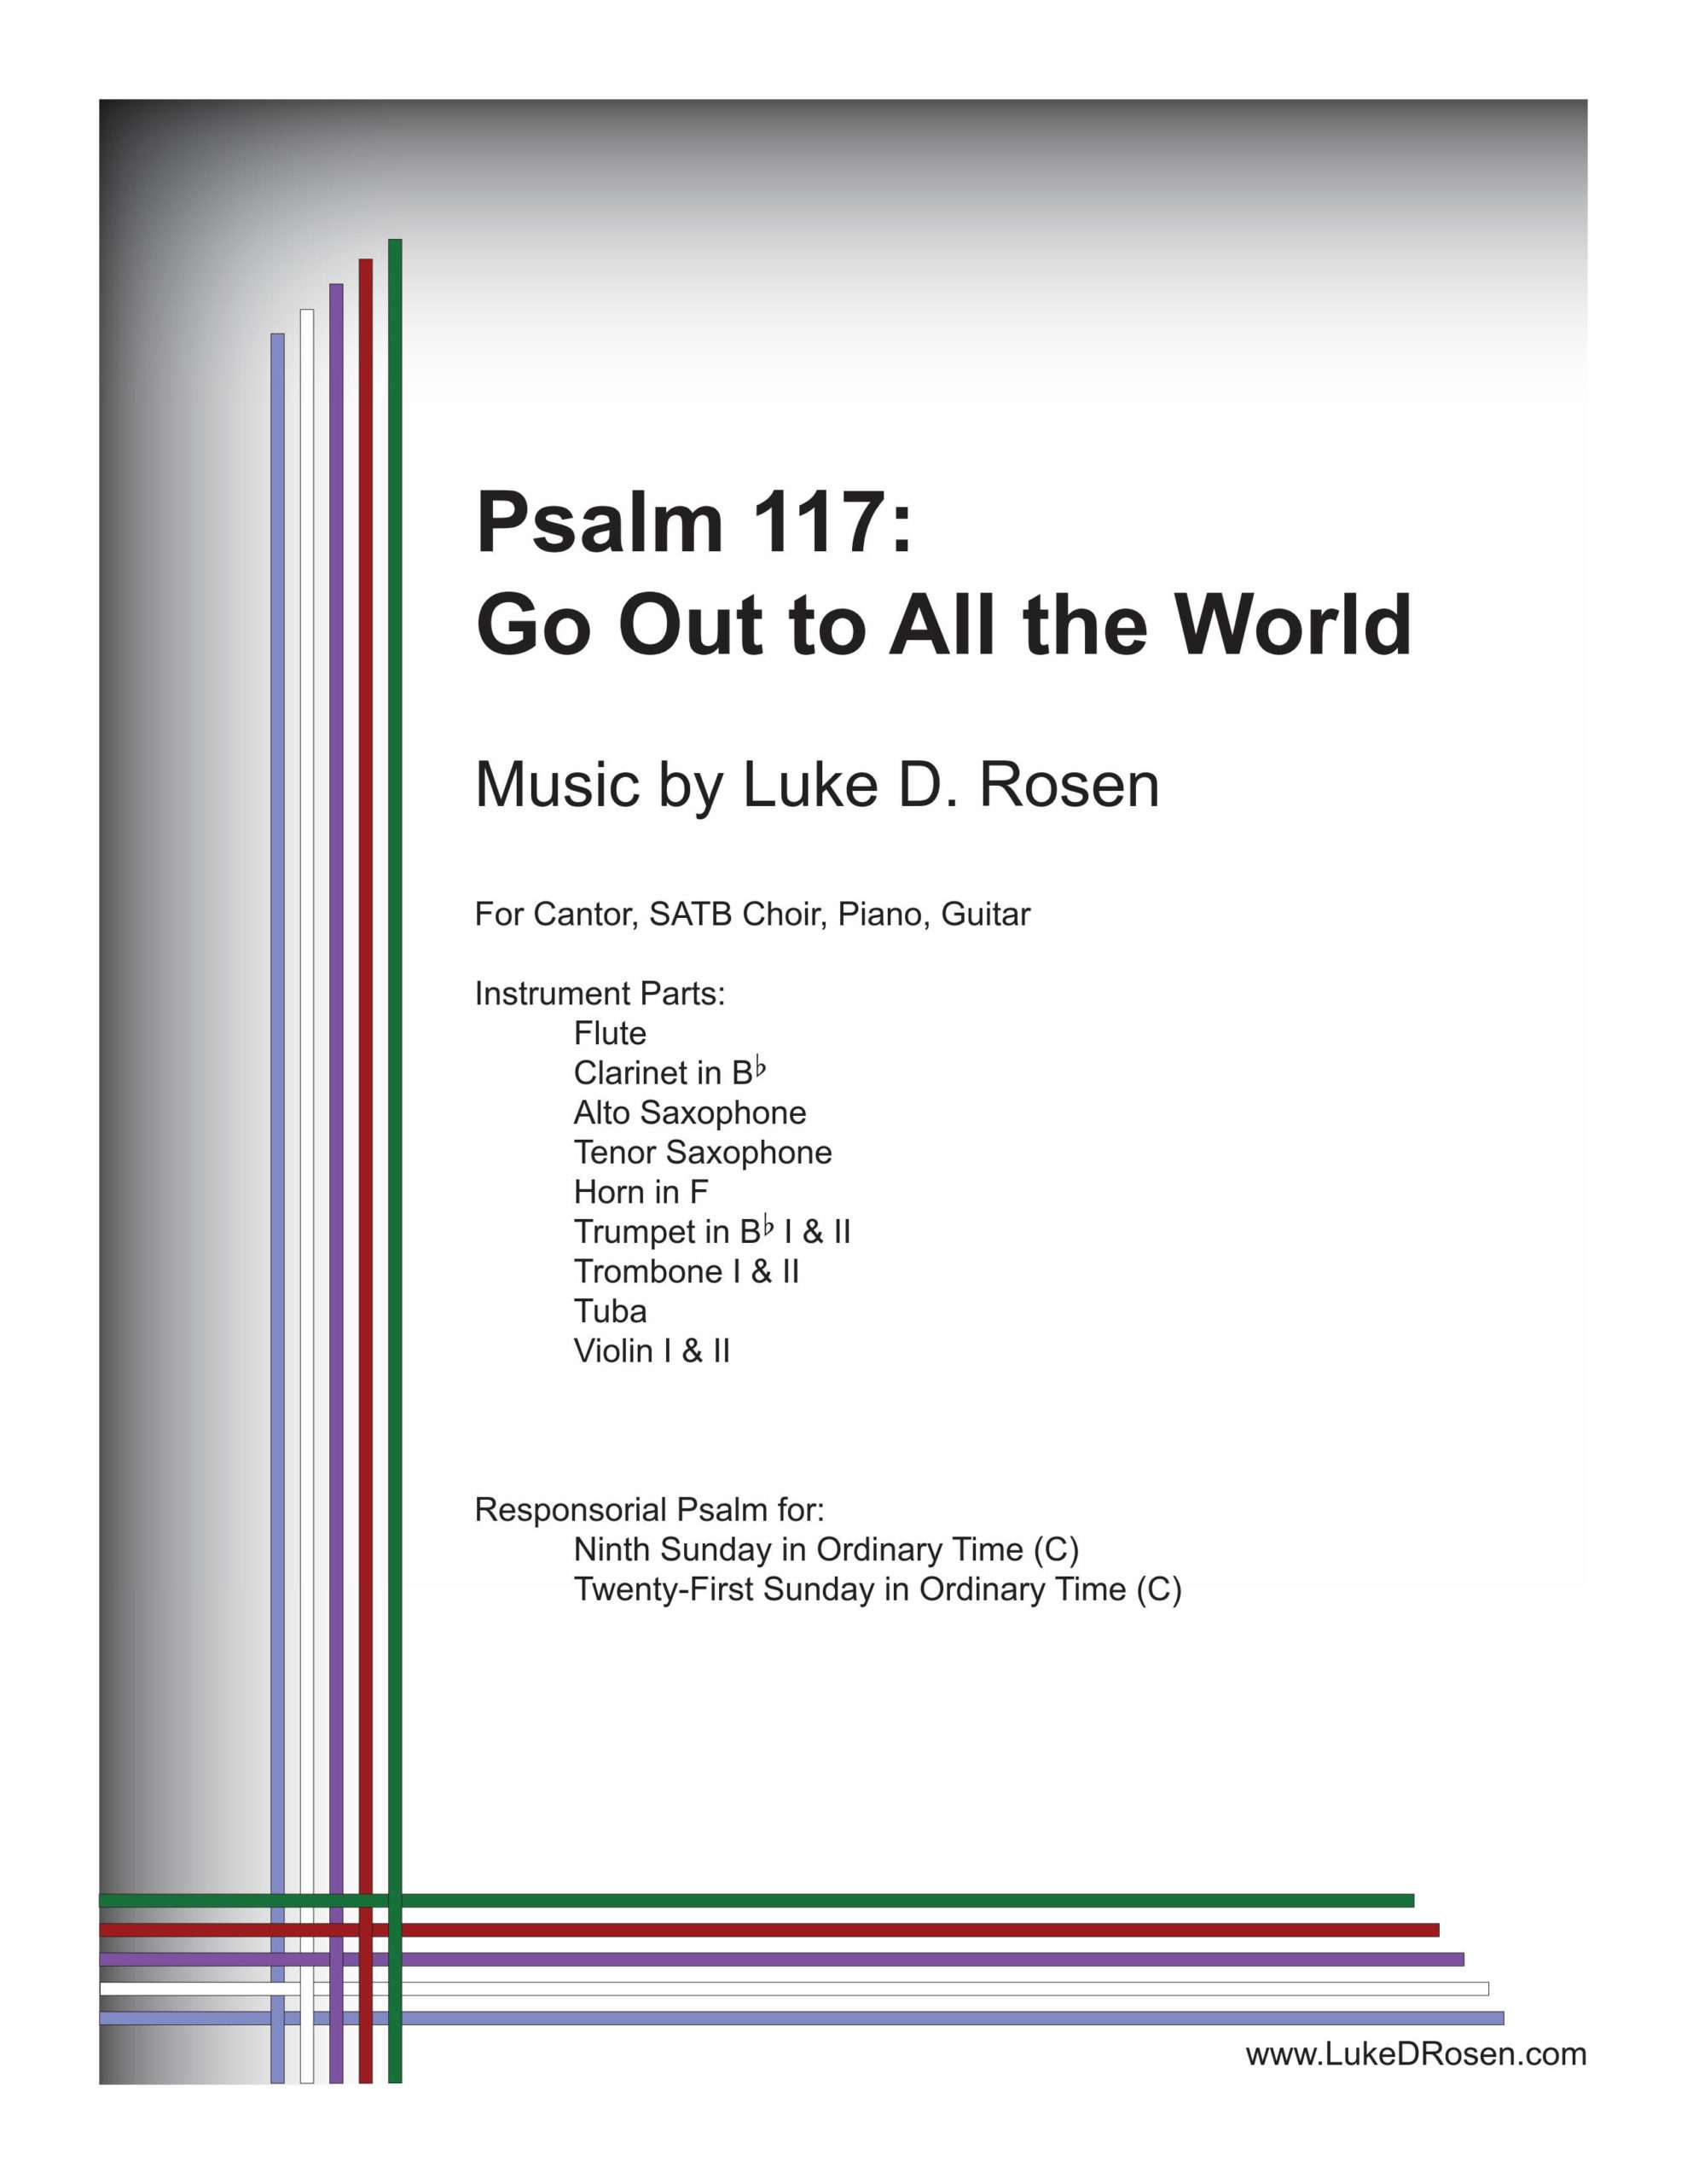 Psalm 117 – Go Out to All the World (Rosen)